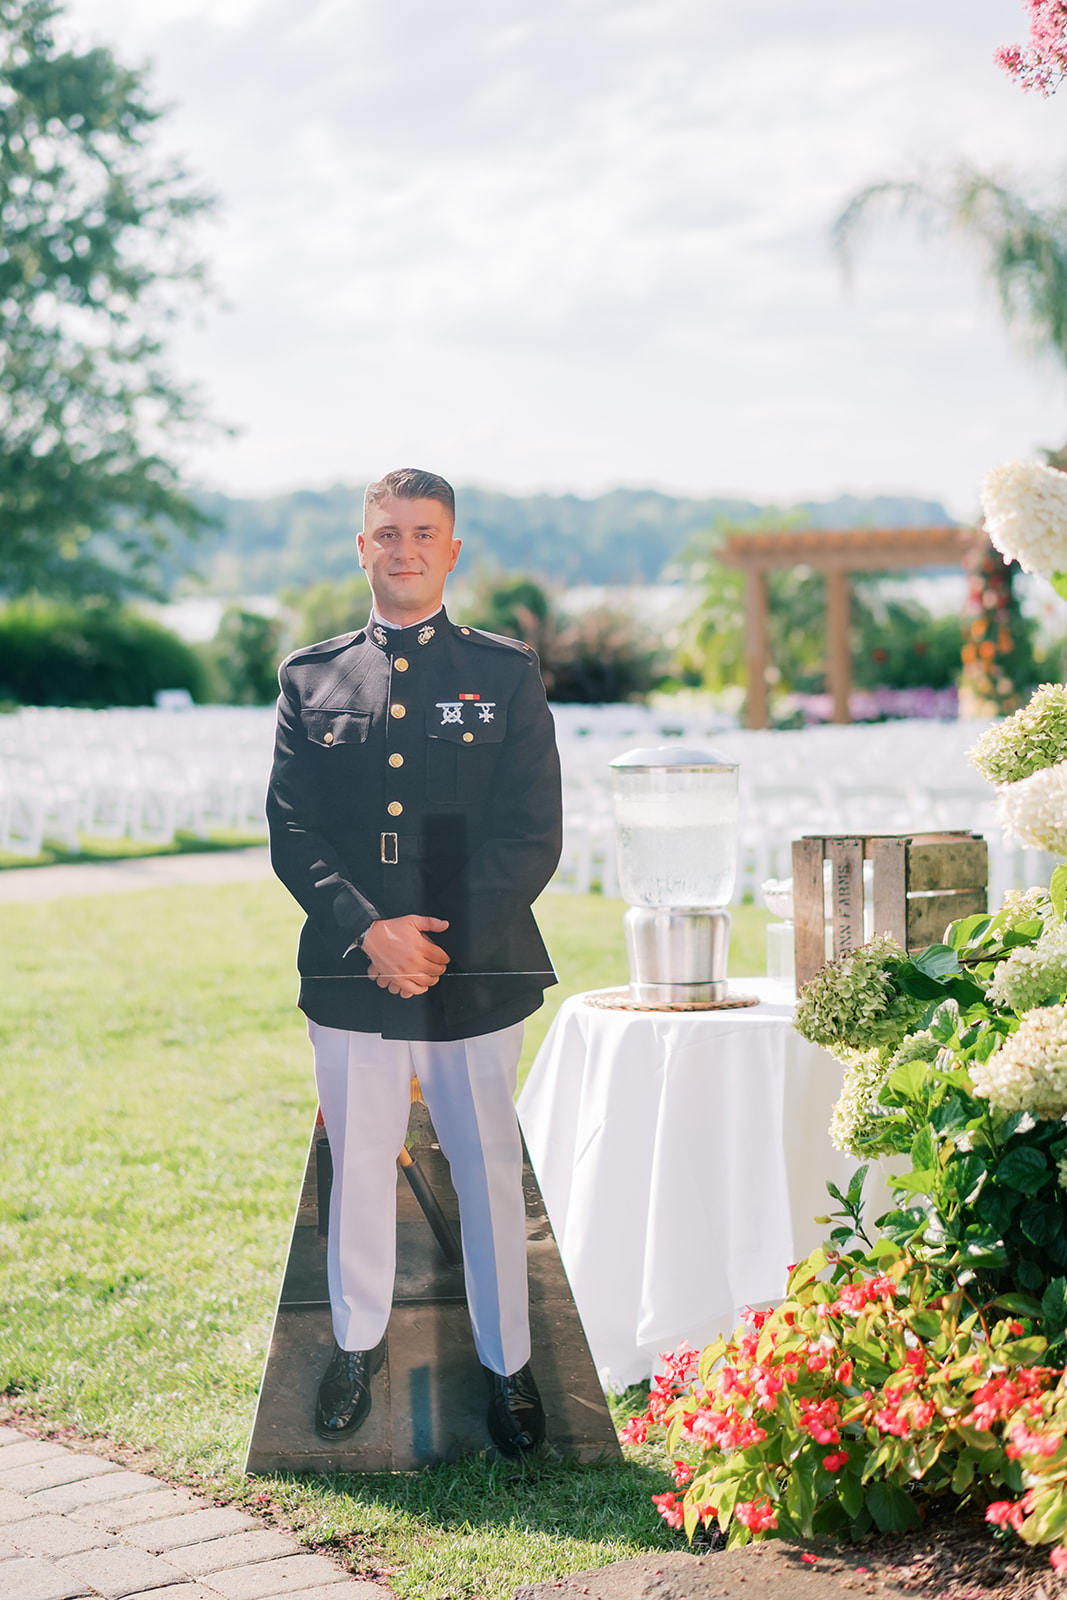 life-size photo of bride's brother in military attire